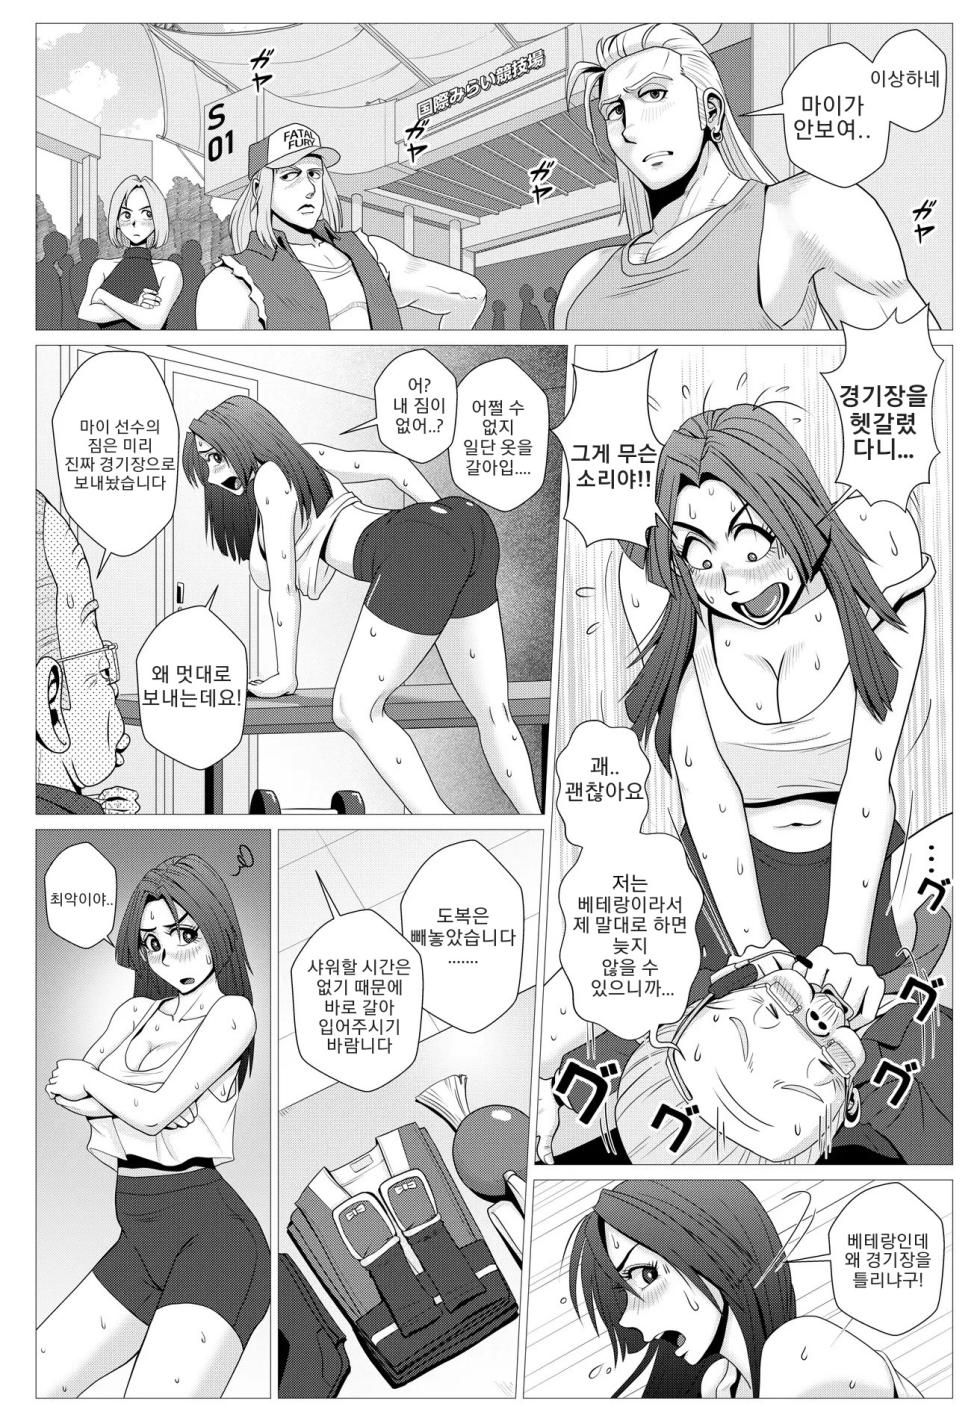 [Falcon115 (Forester)] Maidono no San (The King of Fighters) [Korean] - Page 3